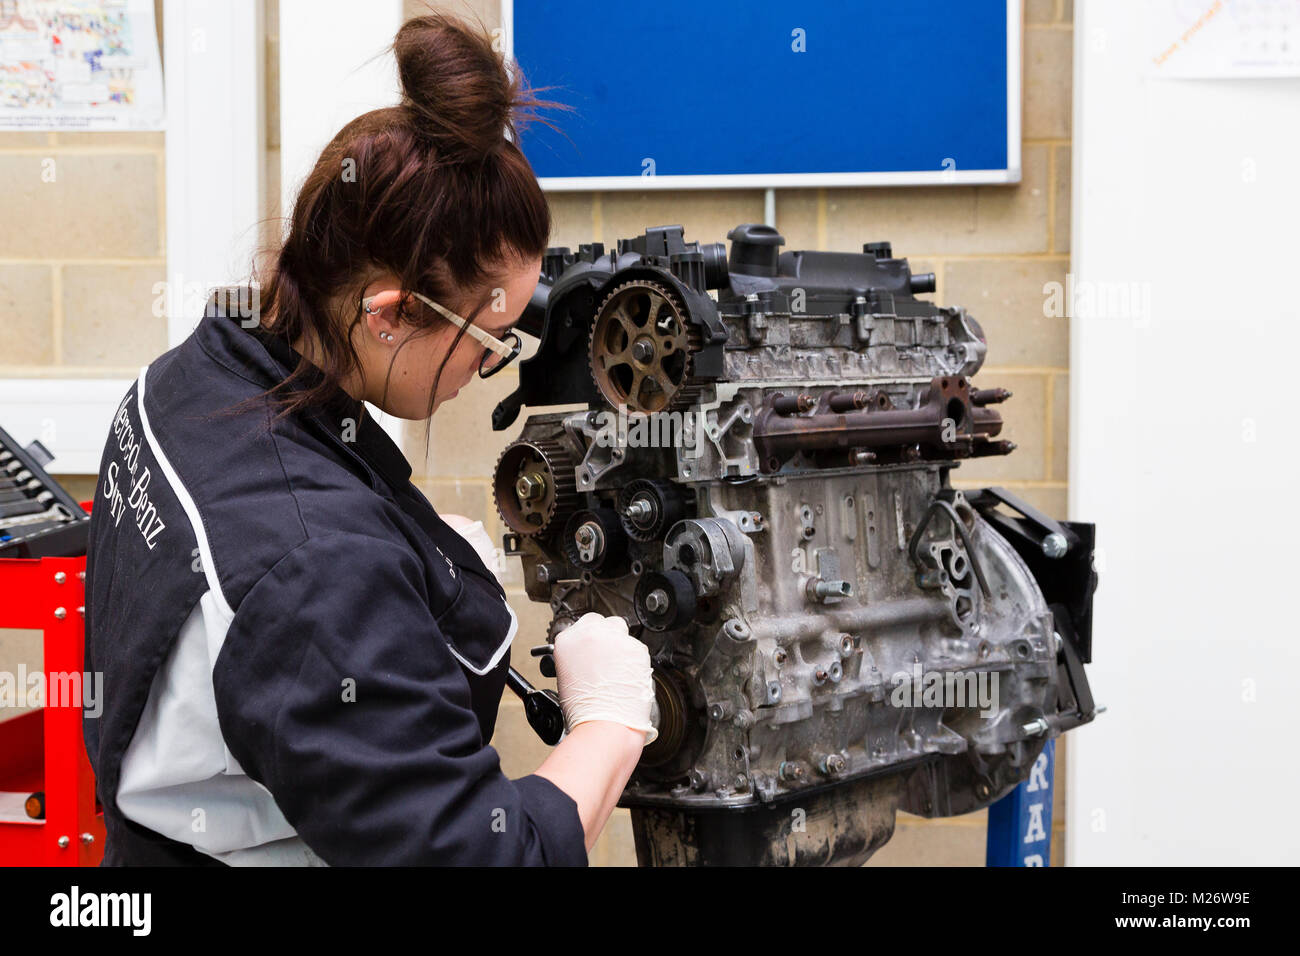 A young woman wearing white gloves replaces the timing belt on a car engine. Stock Photo